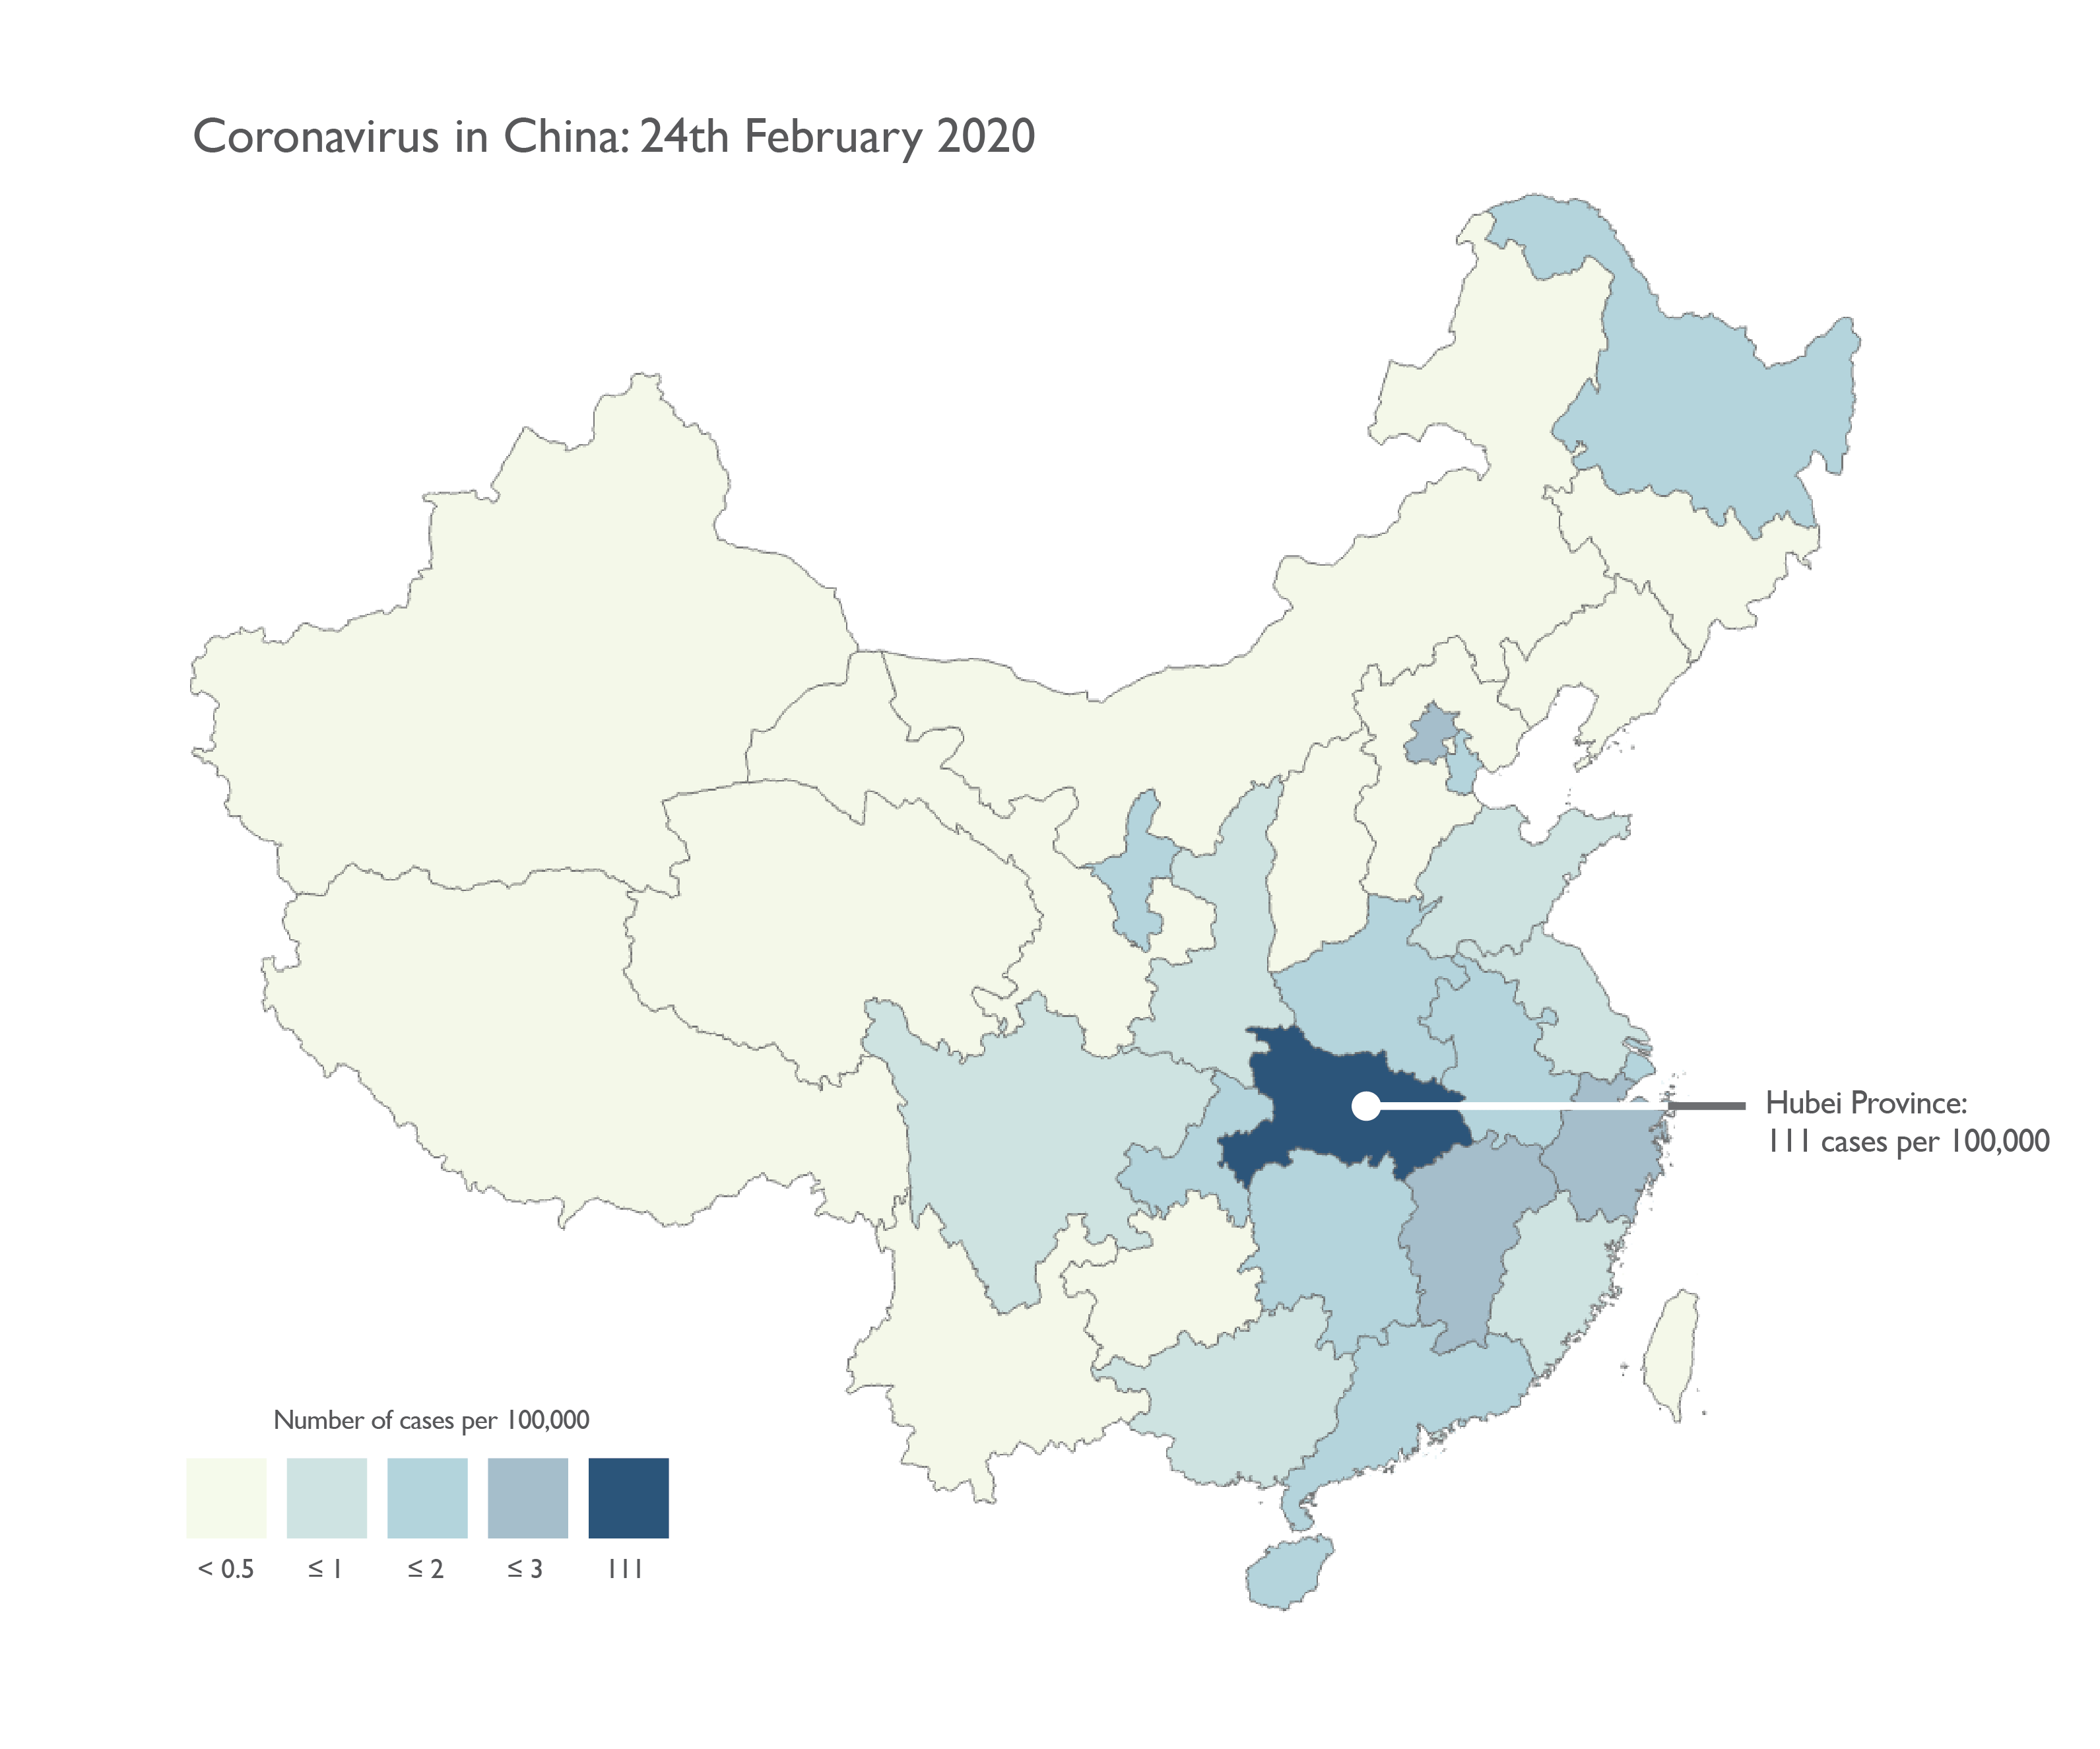 blue map of China showing number of coronavirus cases per 100,000 people by province